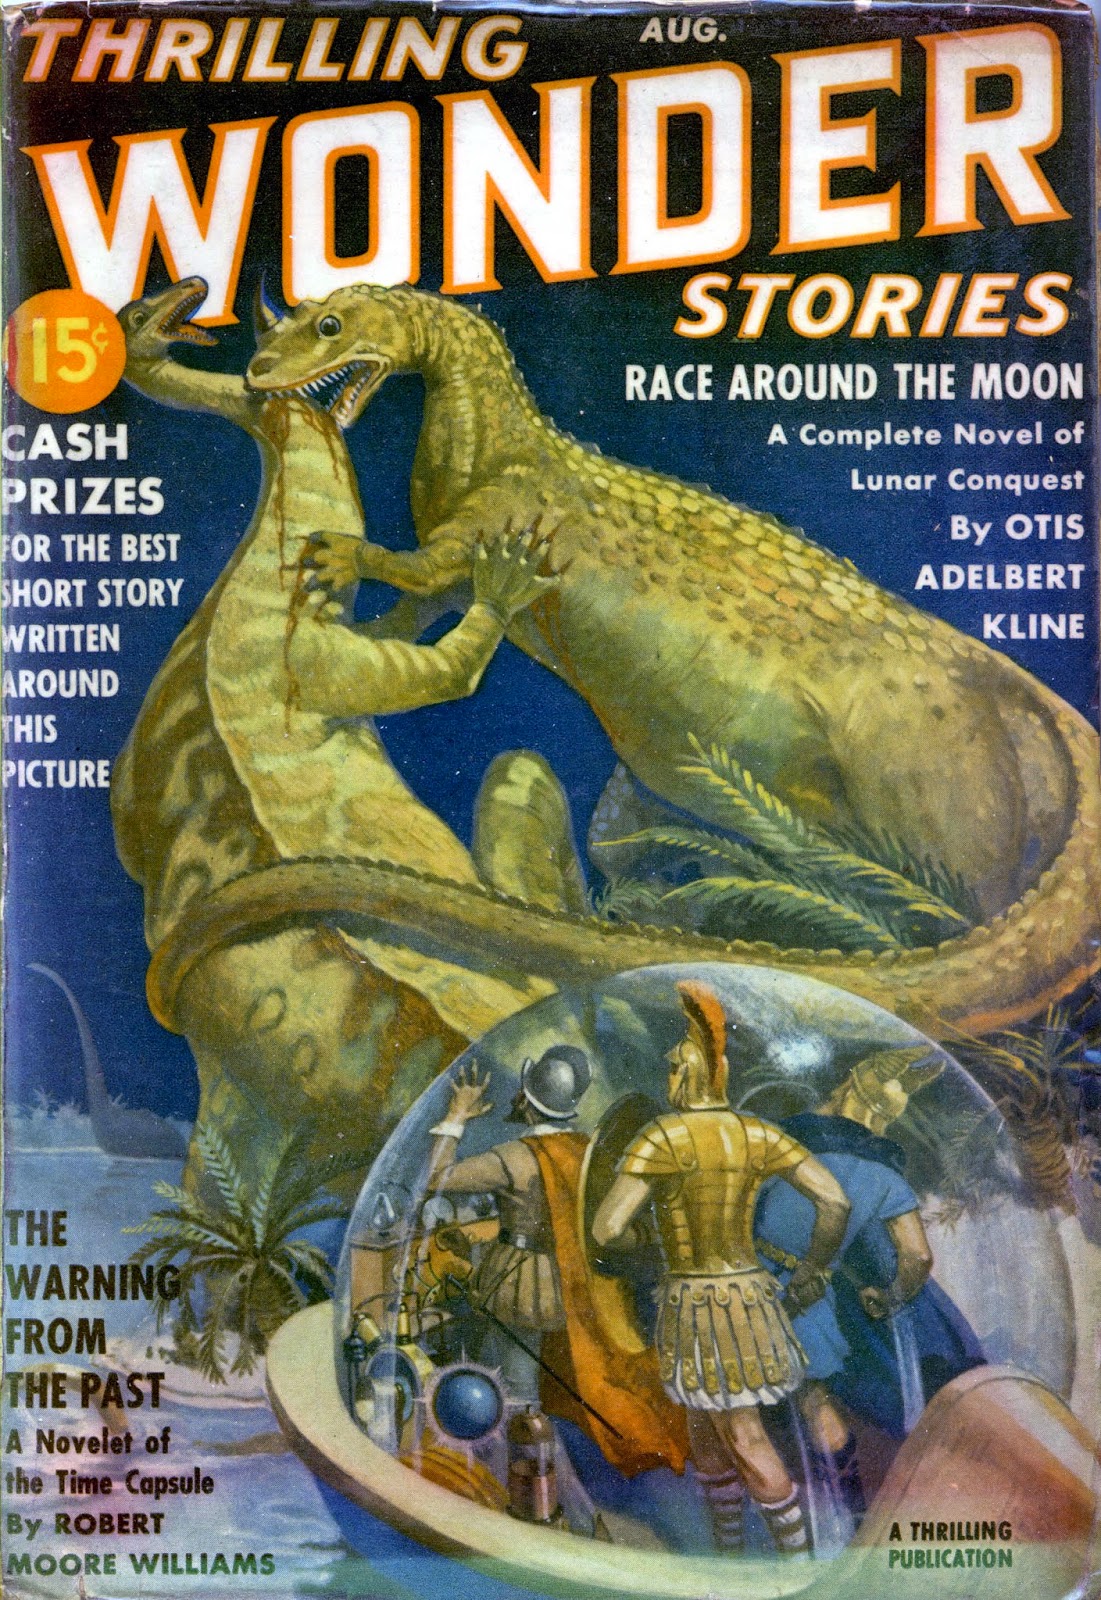 http://pulpcovers.com/the-warning-from-the-past/